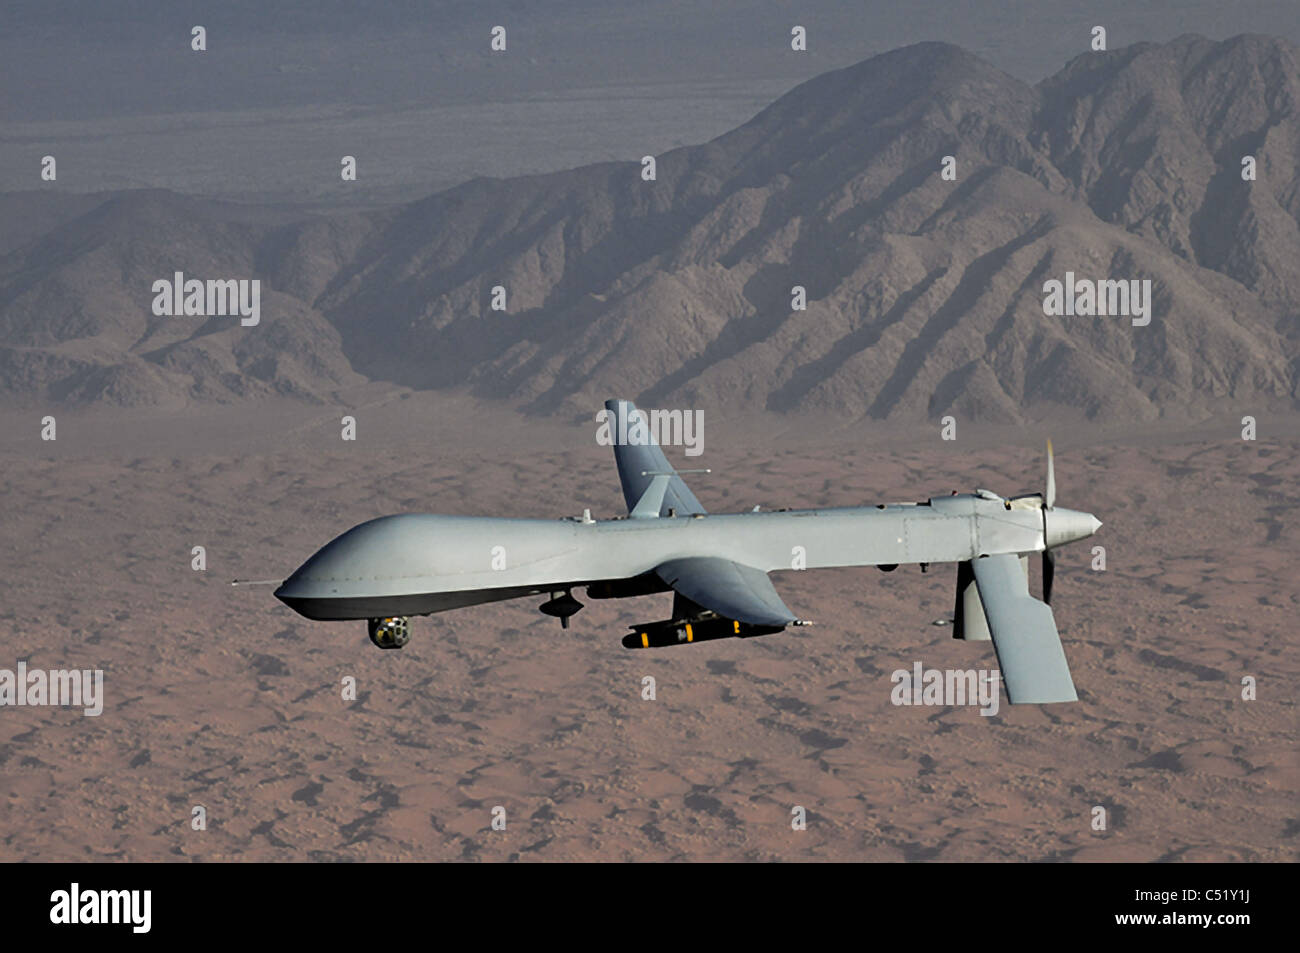 MQ-1 Predator unmanned aircraft in action over Afghanistan. Stock Photo